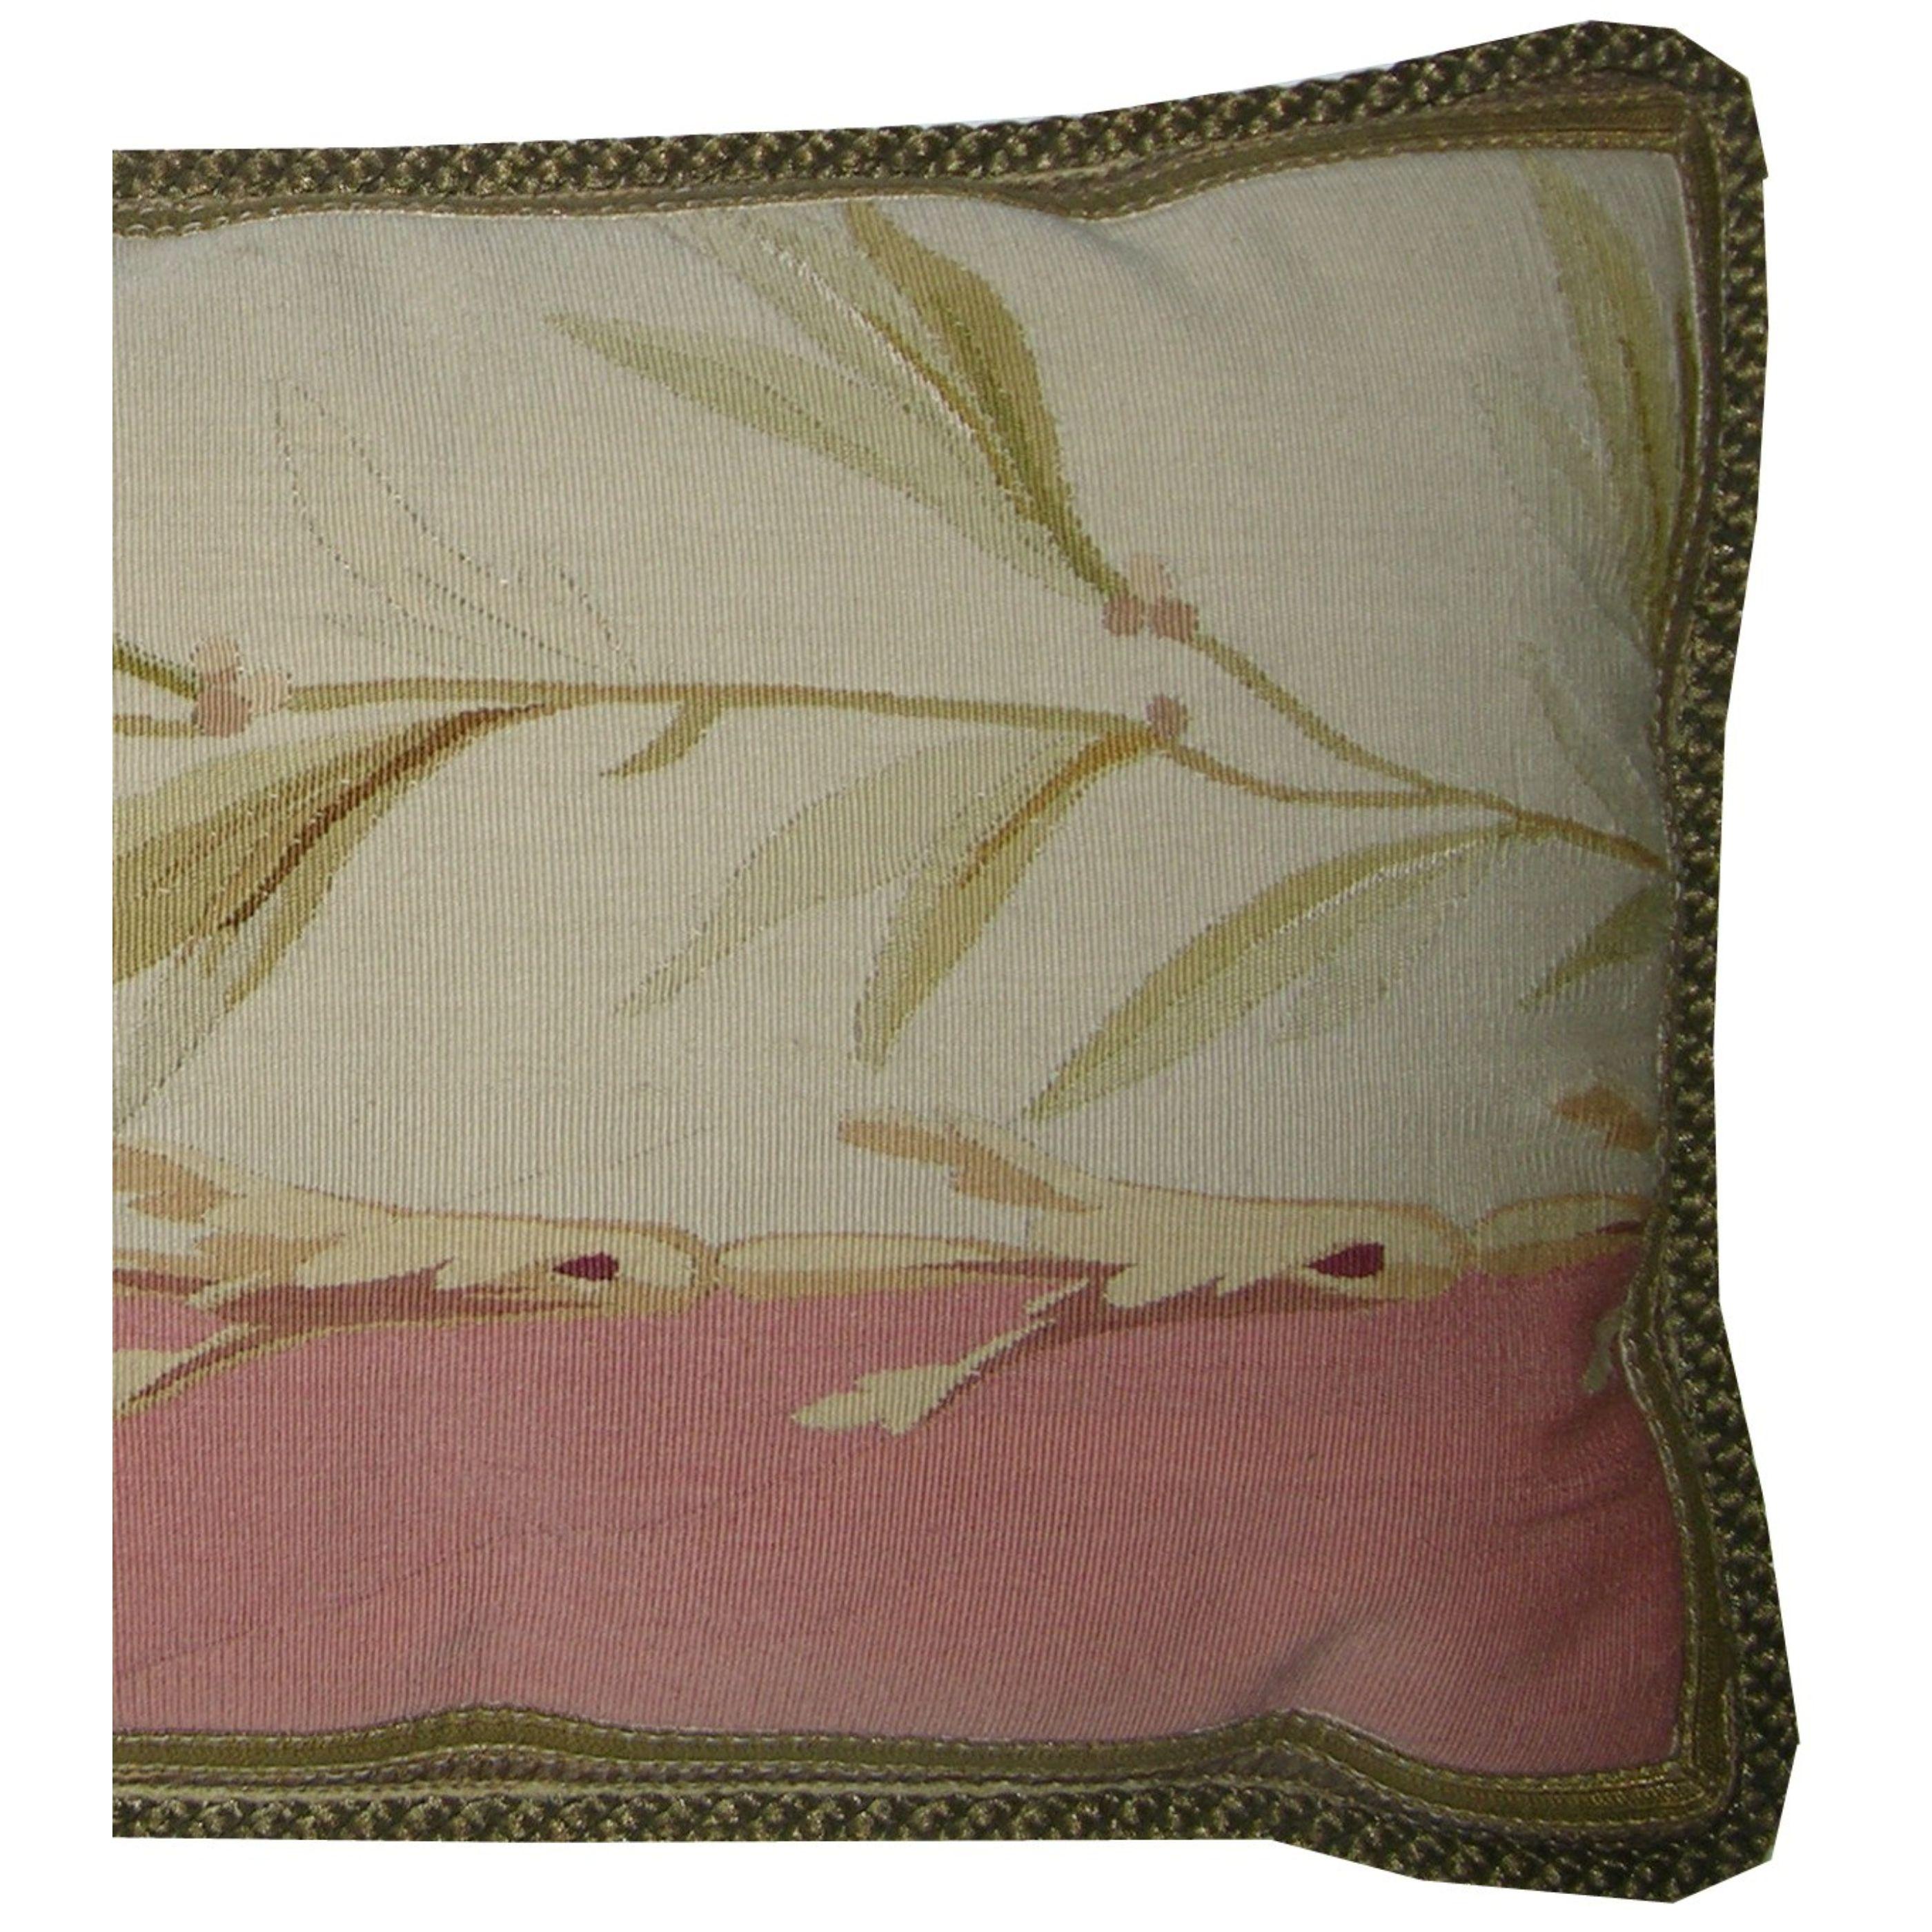 Circa 1860 Antique French Aubusson Tapestry Pillow
